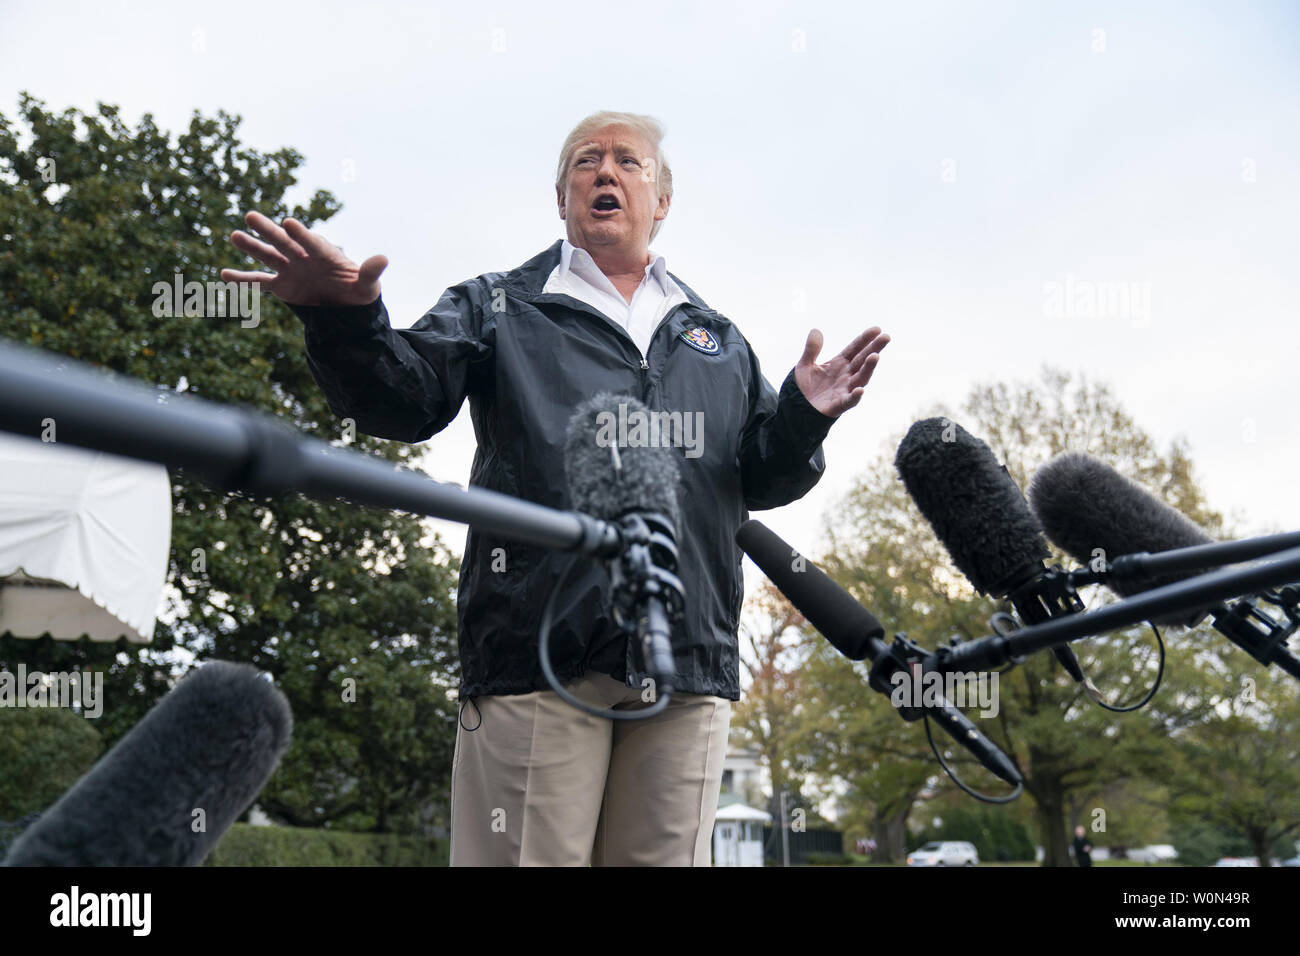 U.S. President Donald Trump speaks to the media before he departs the White House for California, where he is scheduled to view damage from that state's wildfires, in Washington, DC, on November 17, 2018. Seventy-four people have been killed and more than 1,000 people are missing due to multiple devastating fires across the state. The President spoke about the investigation into Jamal Khashoggi's murder, the Mueller investigation, and the migrant caravan approaching the southern border.   Photo by Jim Lo Scalzo/UPI Stock Photo